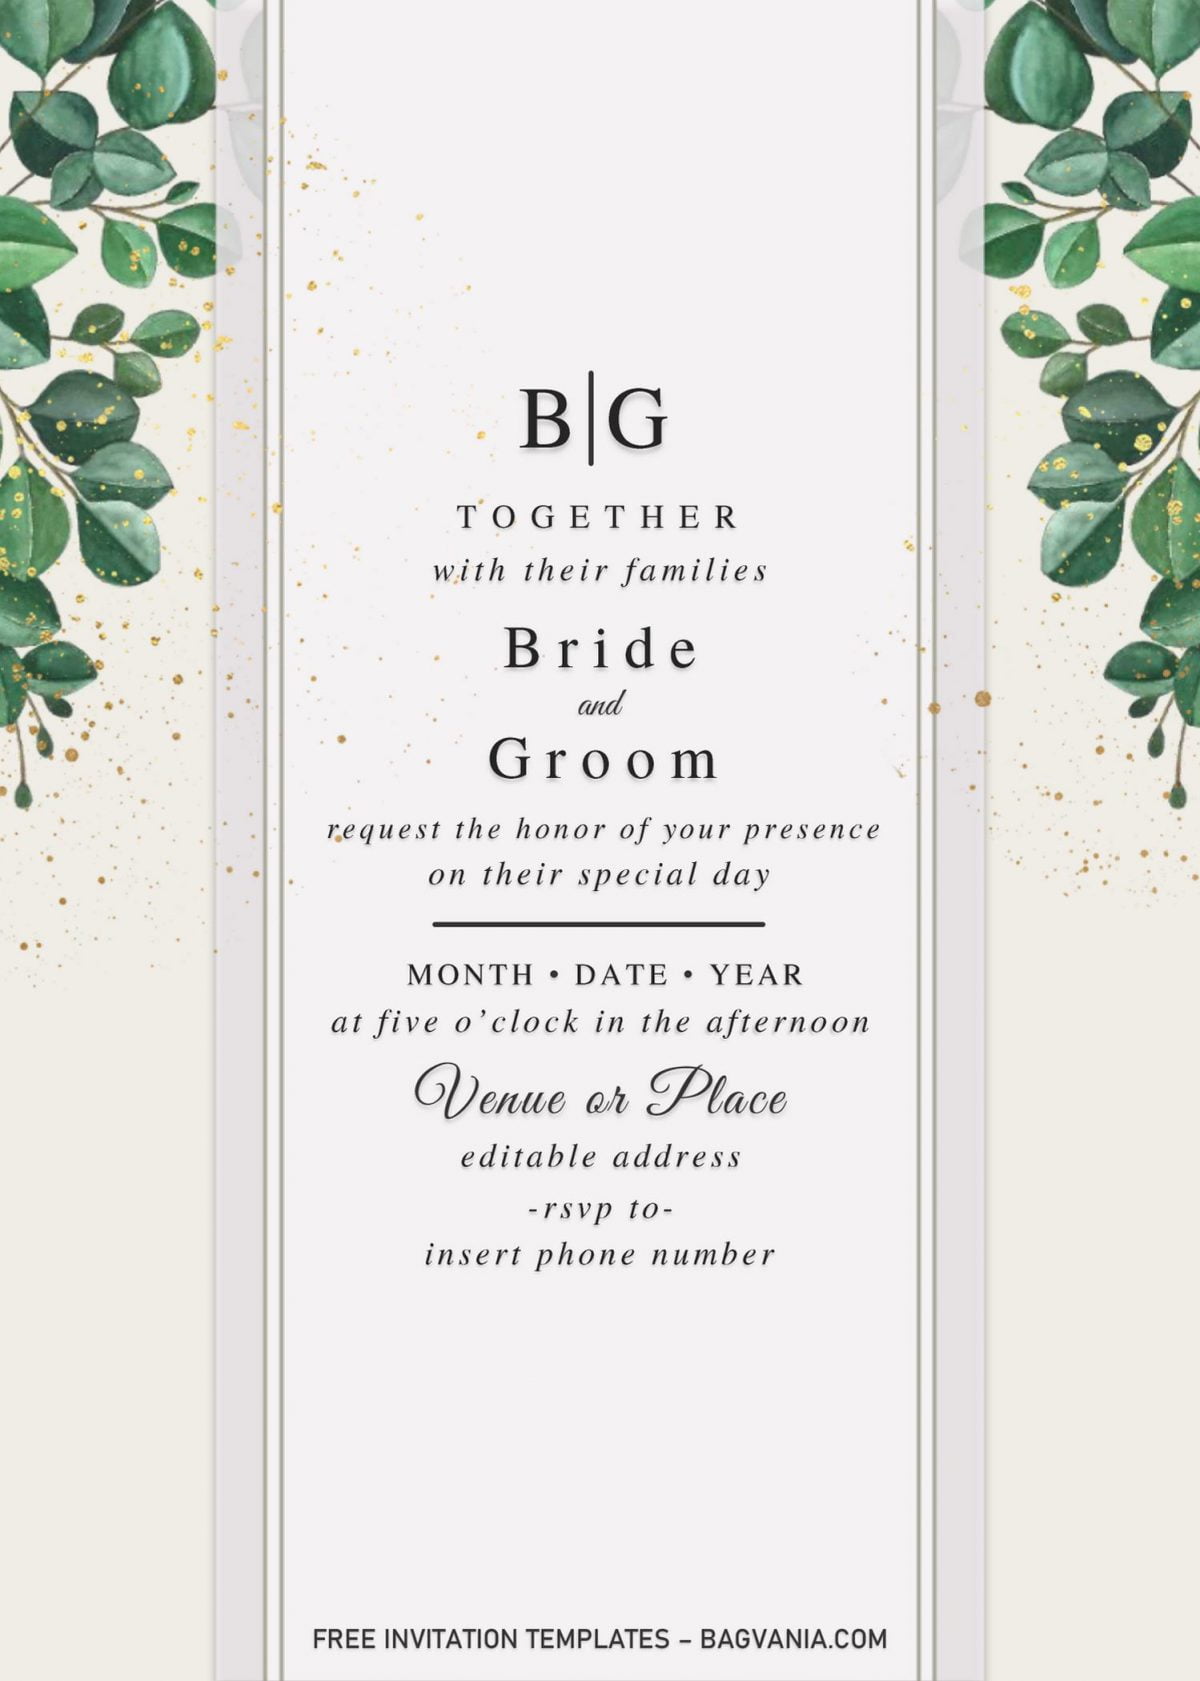 Summer Garden Wedding Invitation Templates - Editable With MS Word and has green eucalyptus leaves